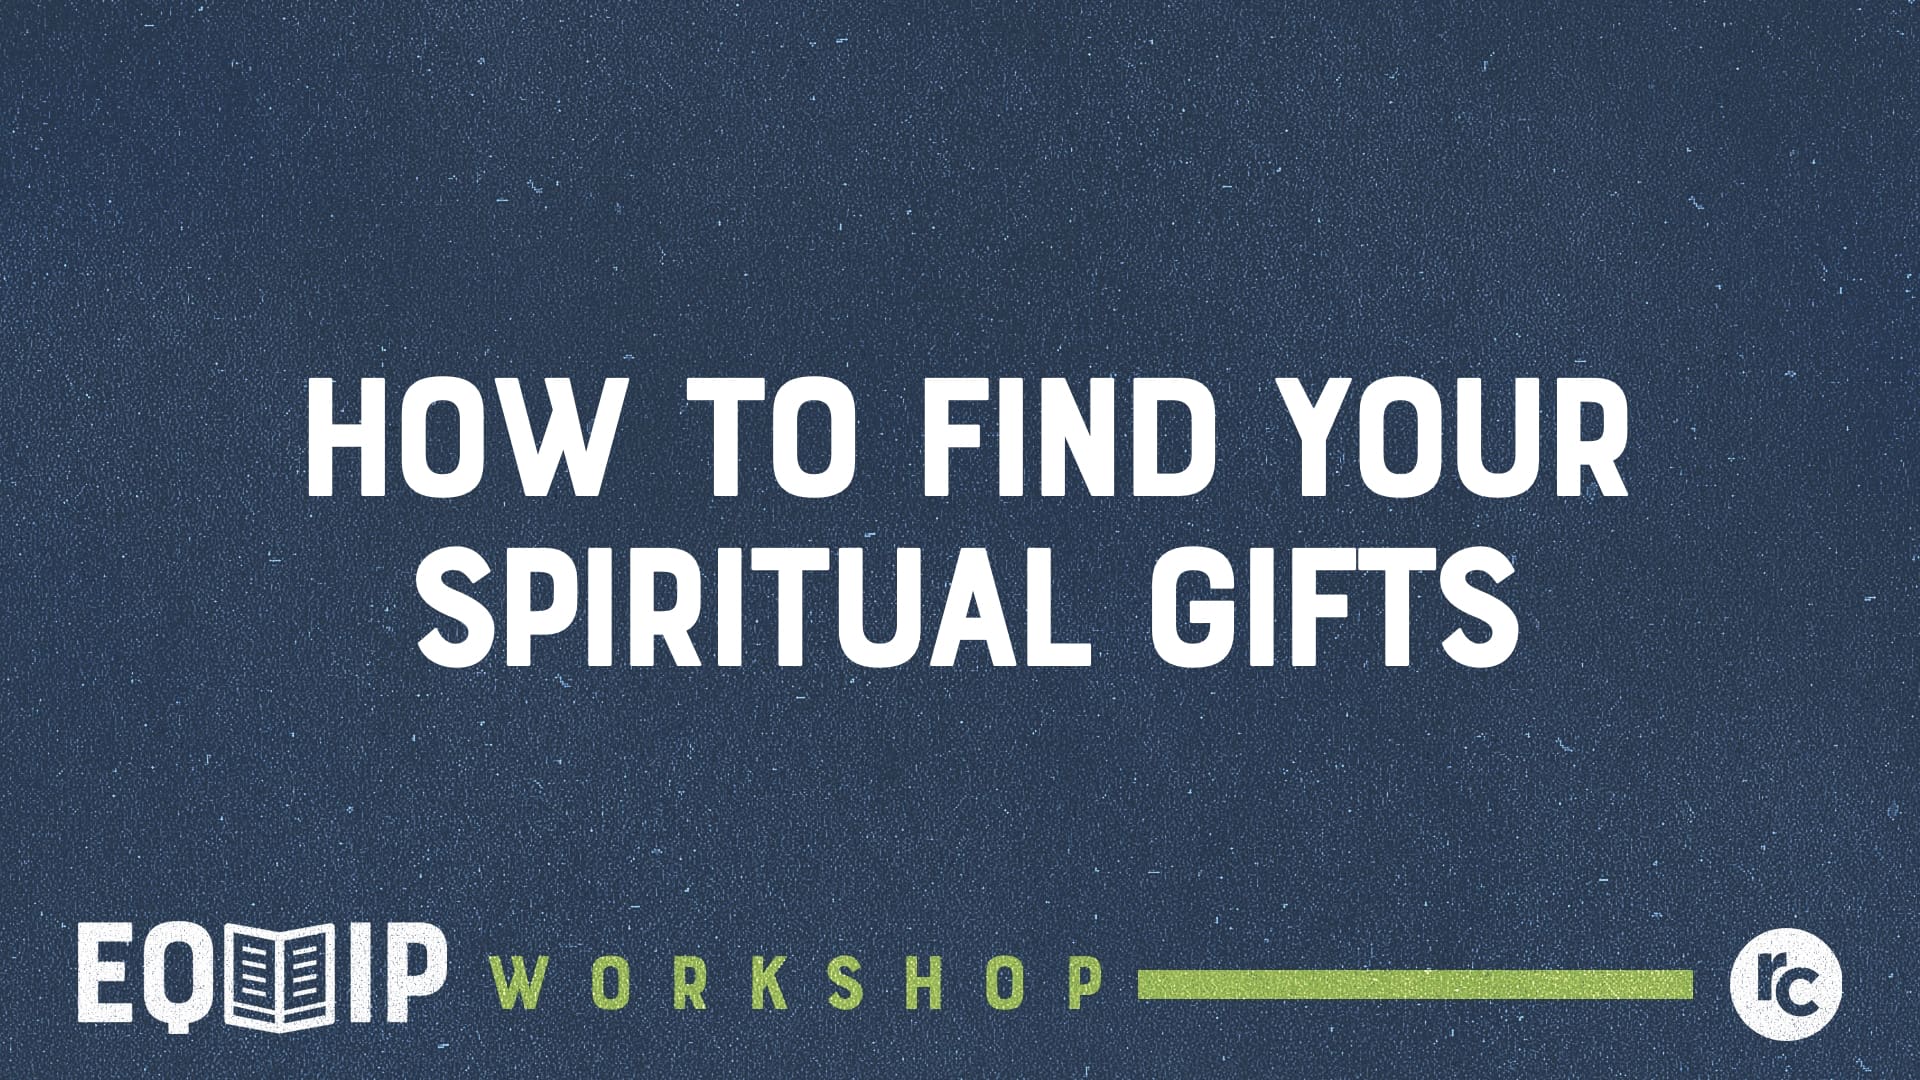 How to Find Your Spiritual Gifts